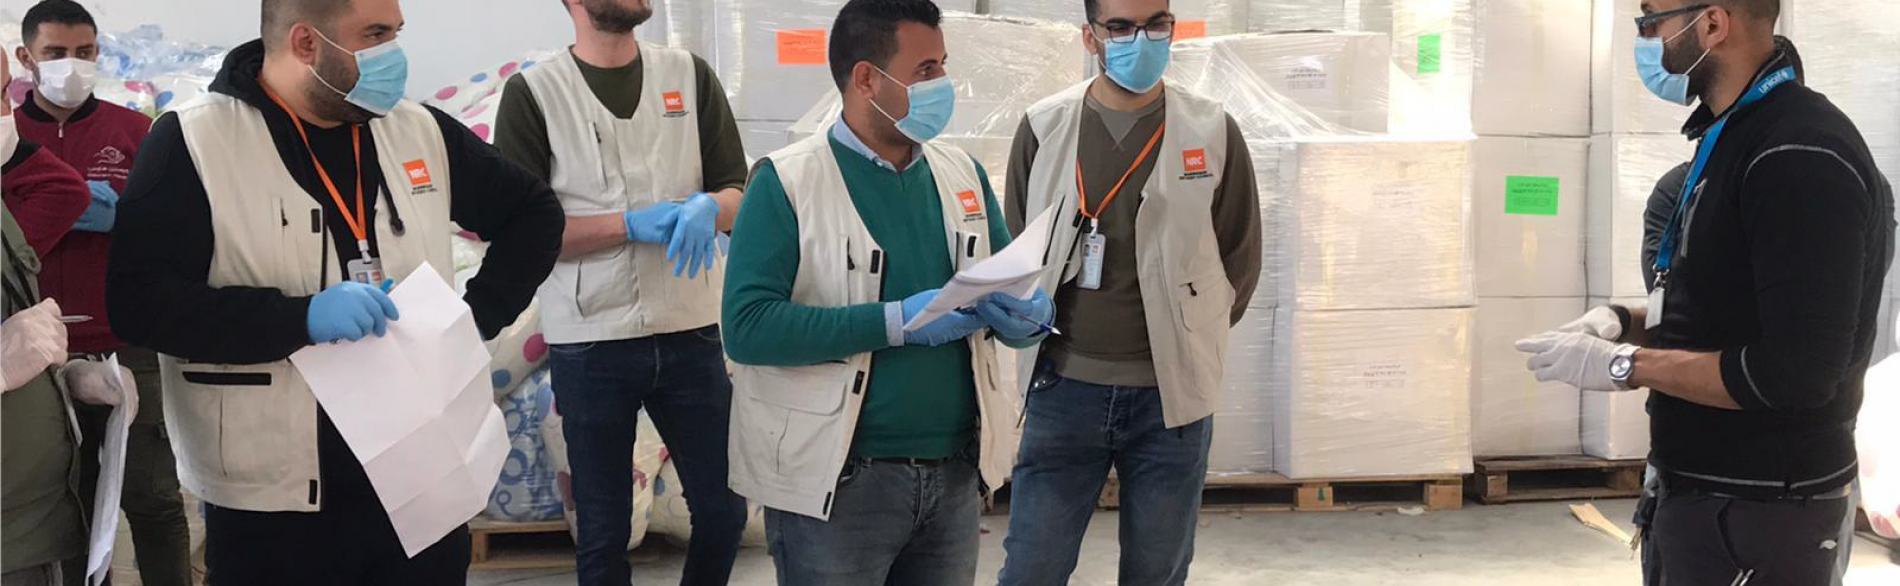 Staff of an aid organization preparing for the distribution of bedding sets to isolation centers. April 2020, Rafah. Photo by NRC